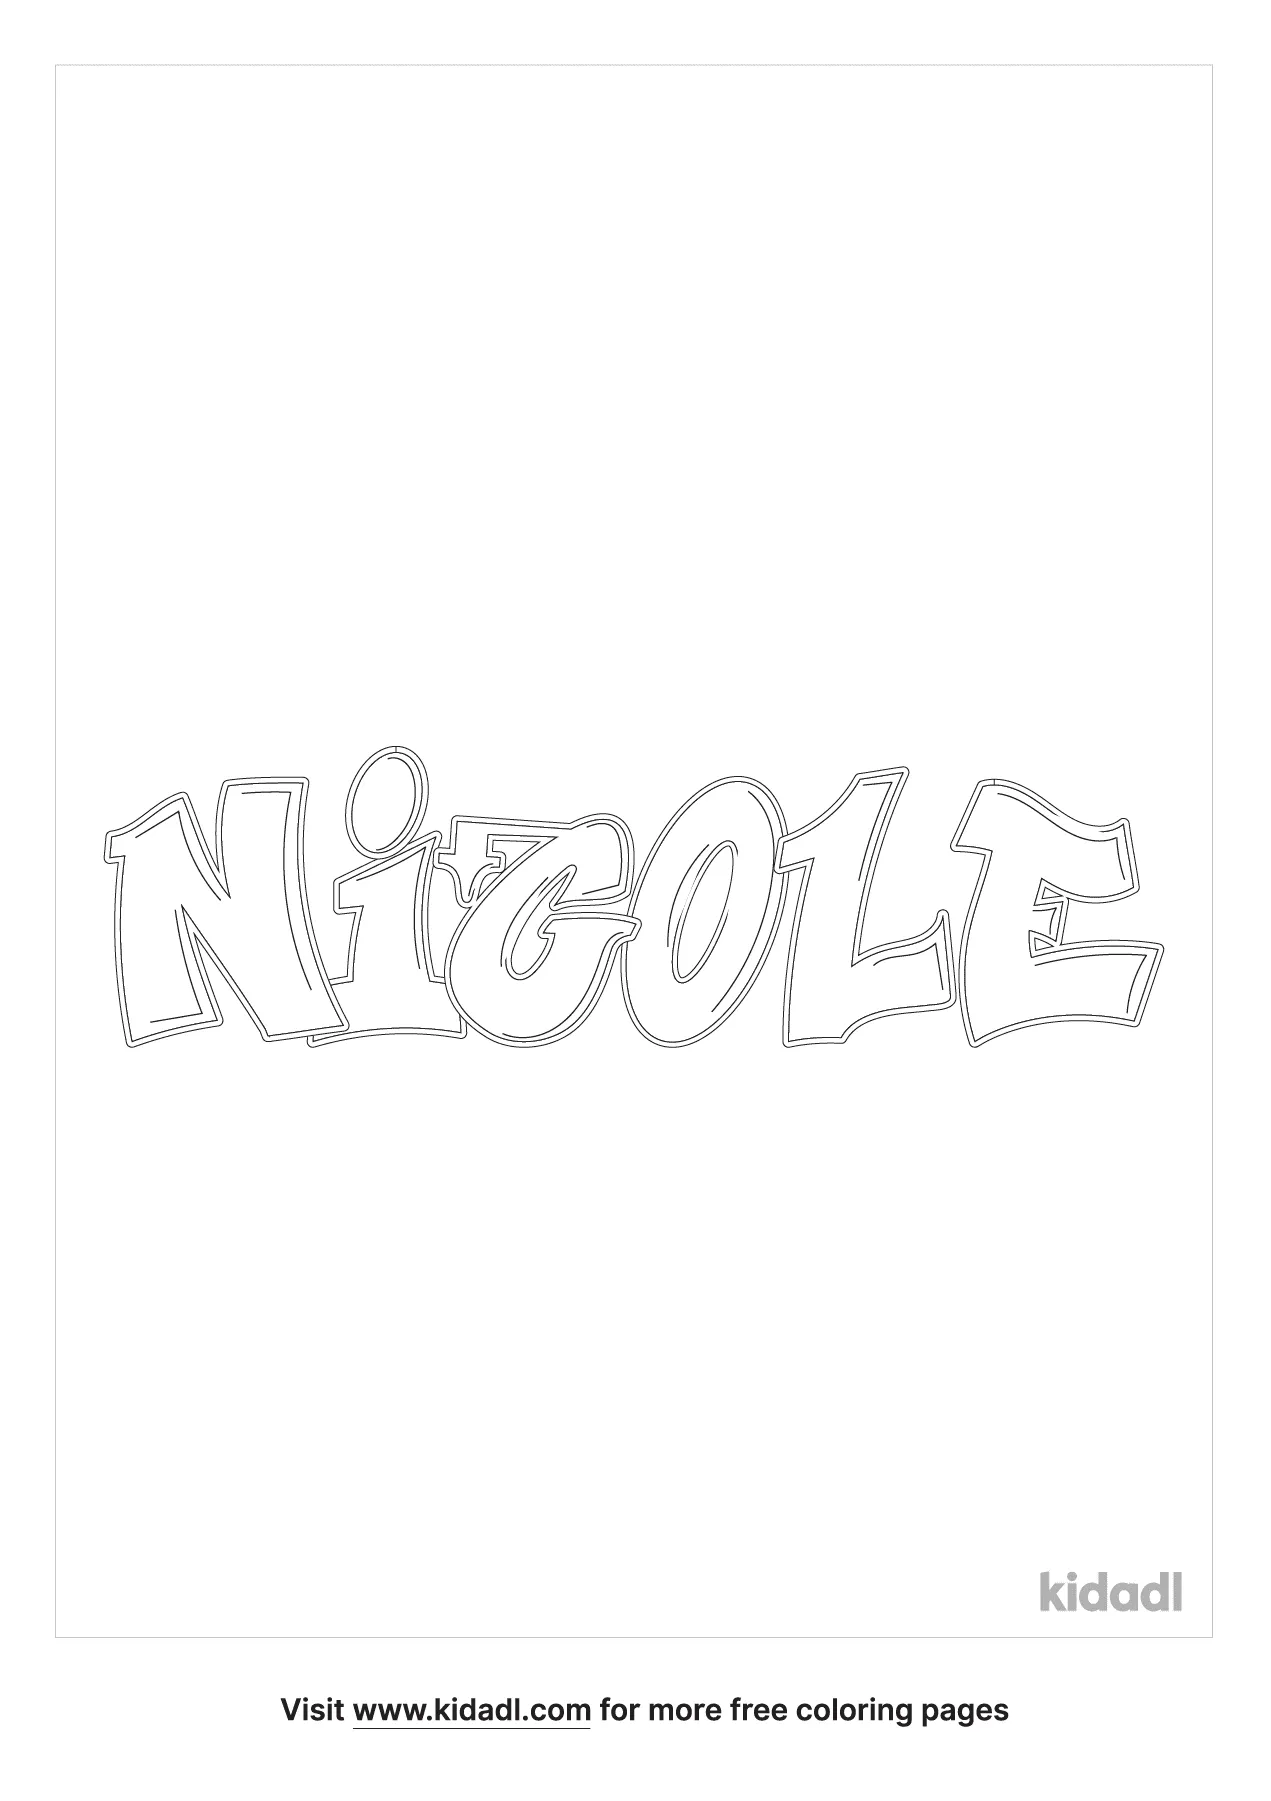 Graffiti Words Name Nicole Coloring Page